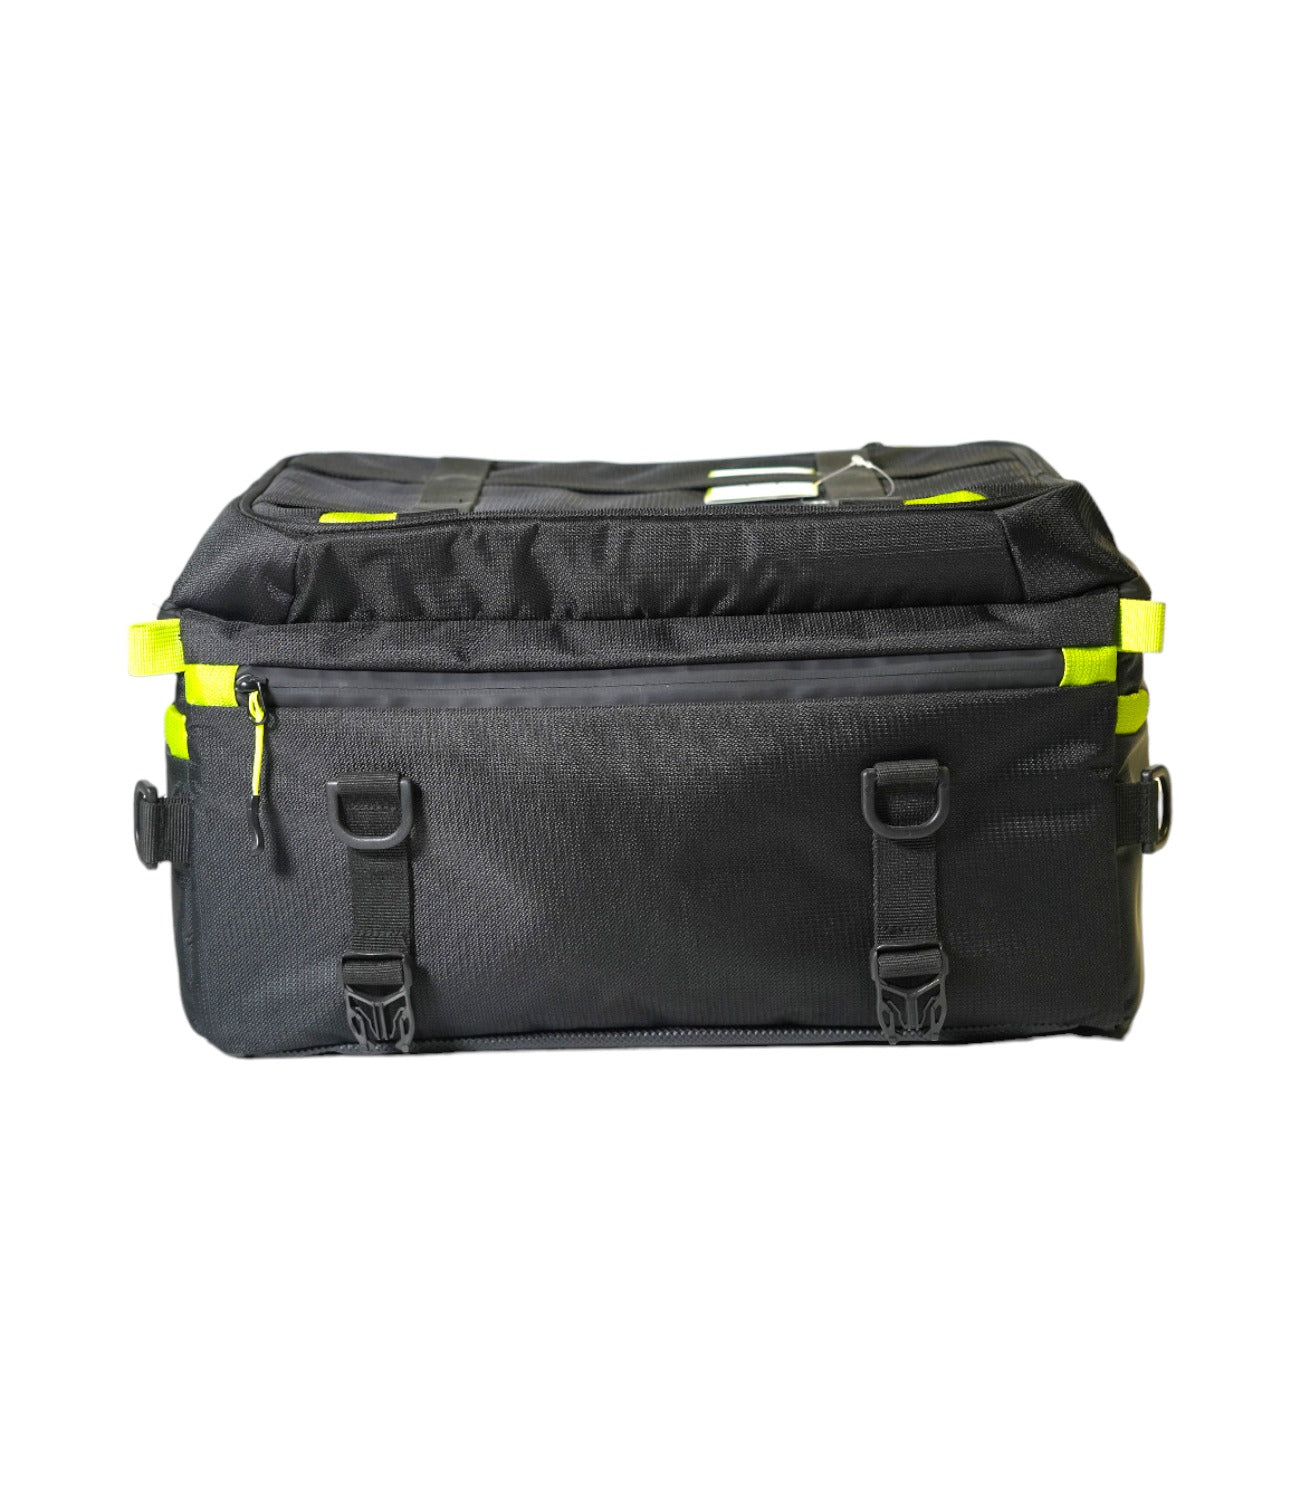 Nomad Gears Indicus Motorcycle Tail Bag